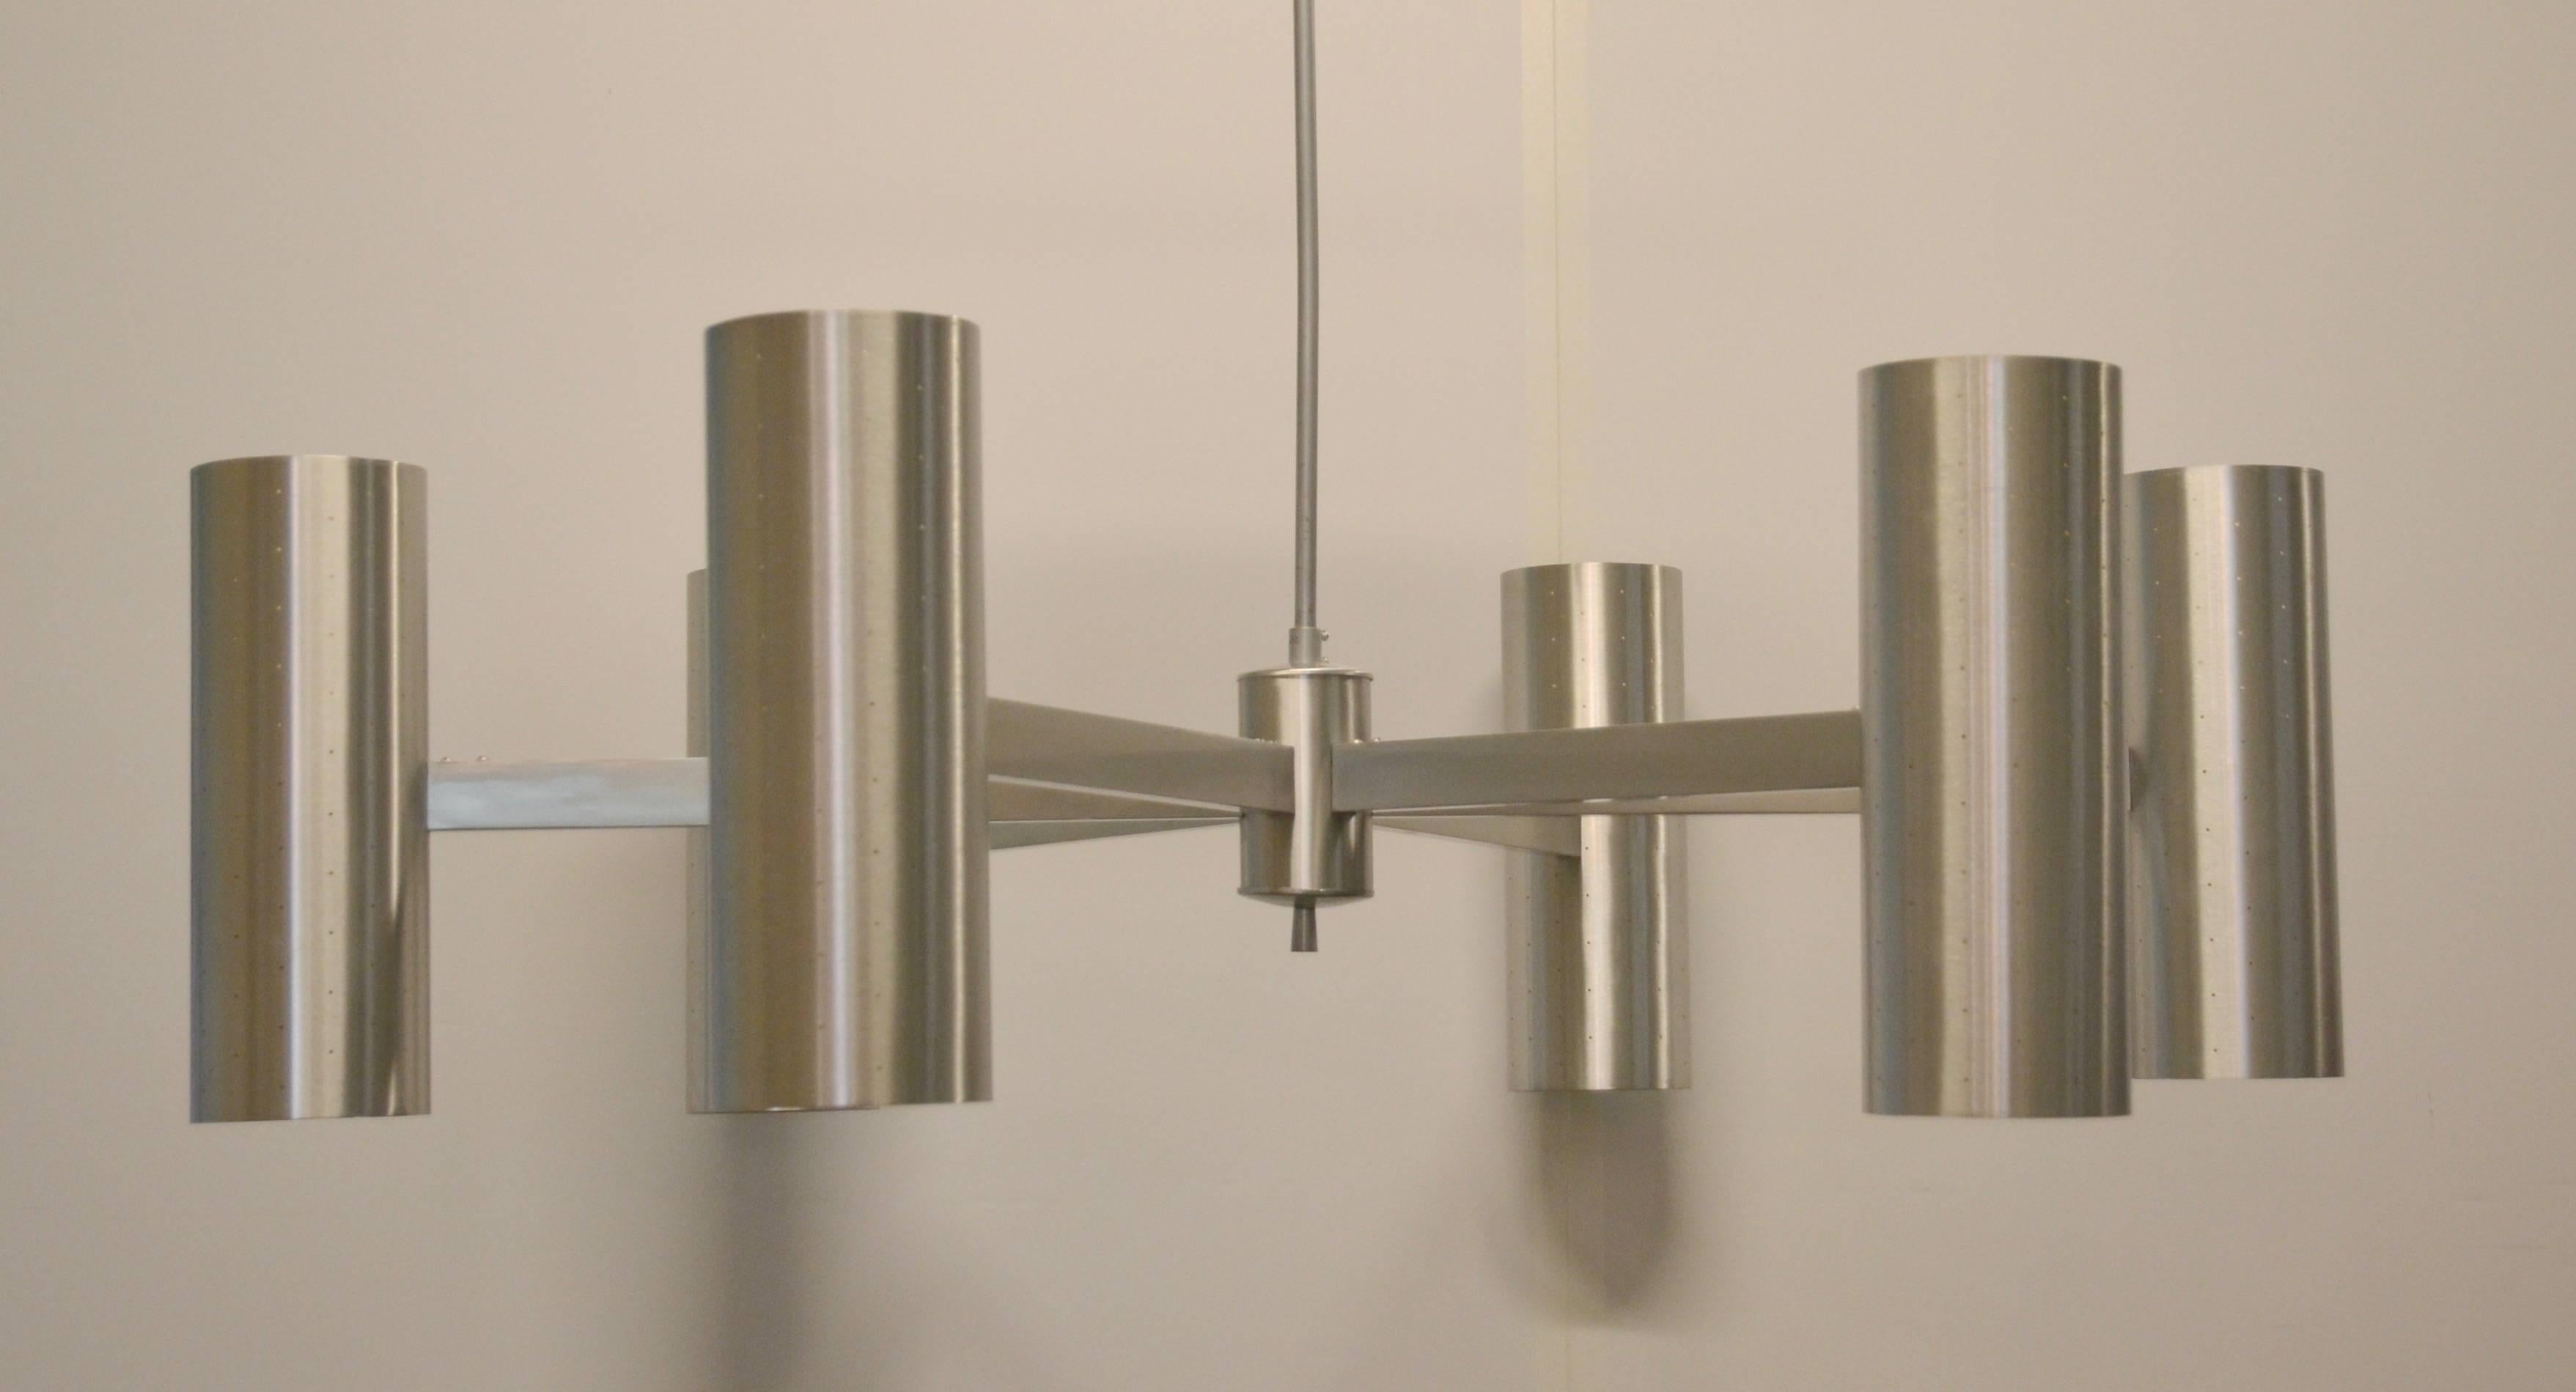 Mid-Century Modern 6 Spoke Aluminum Stainless Finish Pendant Chandeliers 4' wide, 1950s, sold sep.